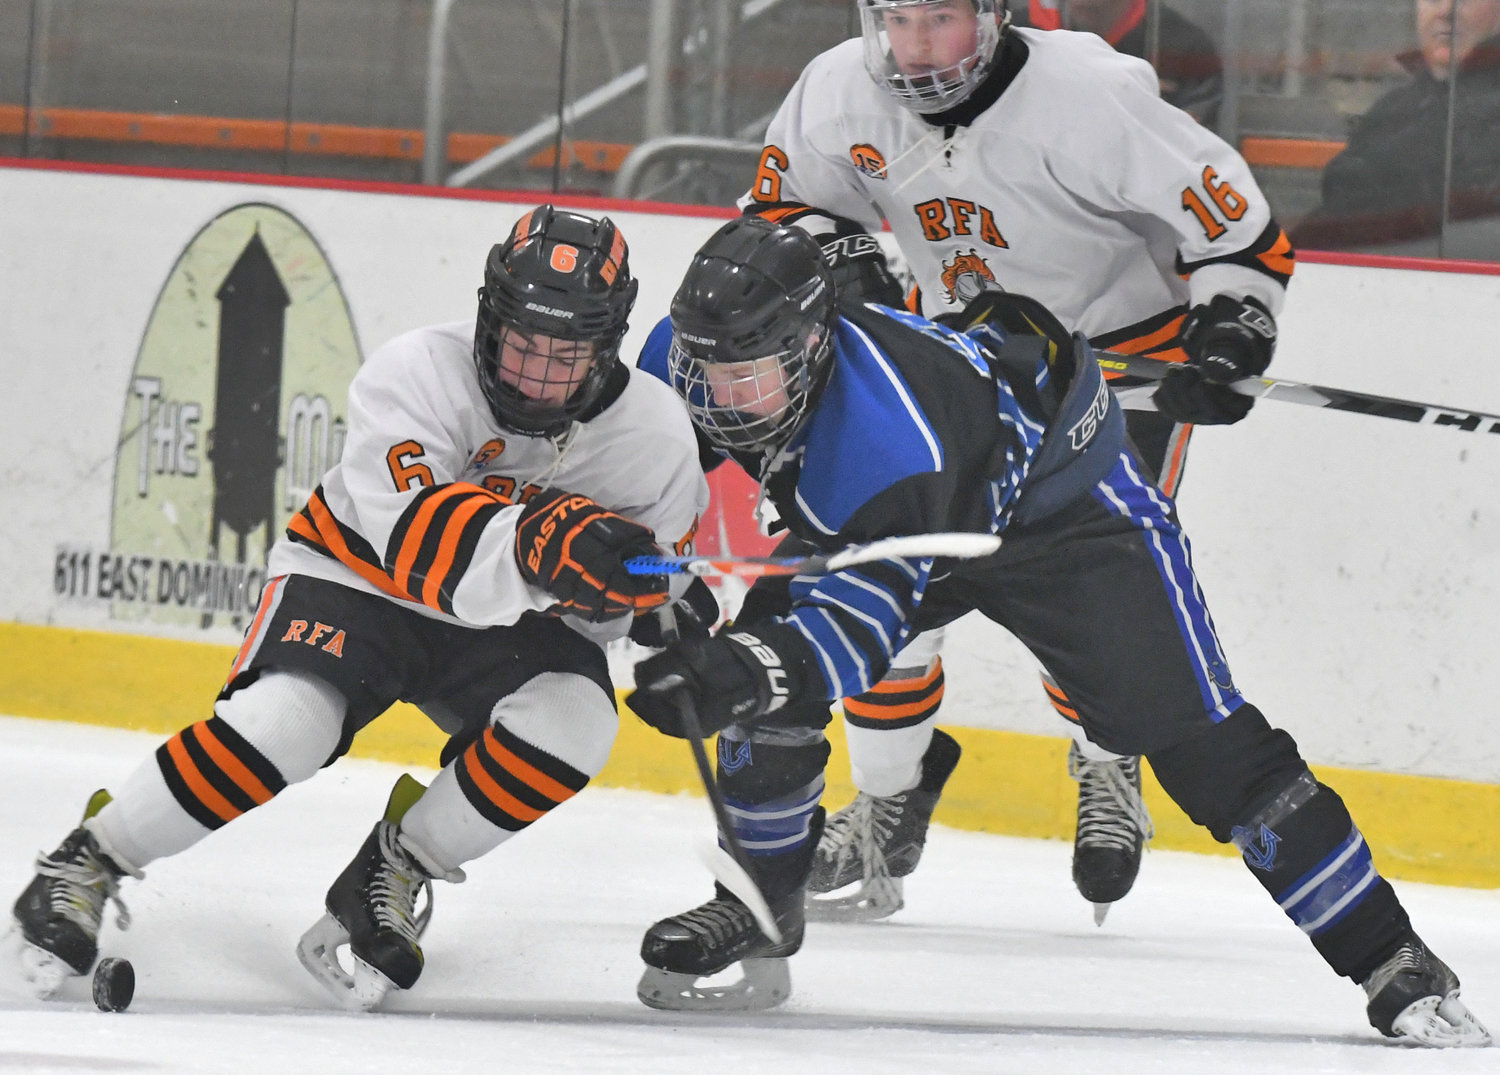 RFA #6 and Geneseo #9try to control the puck